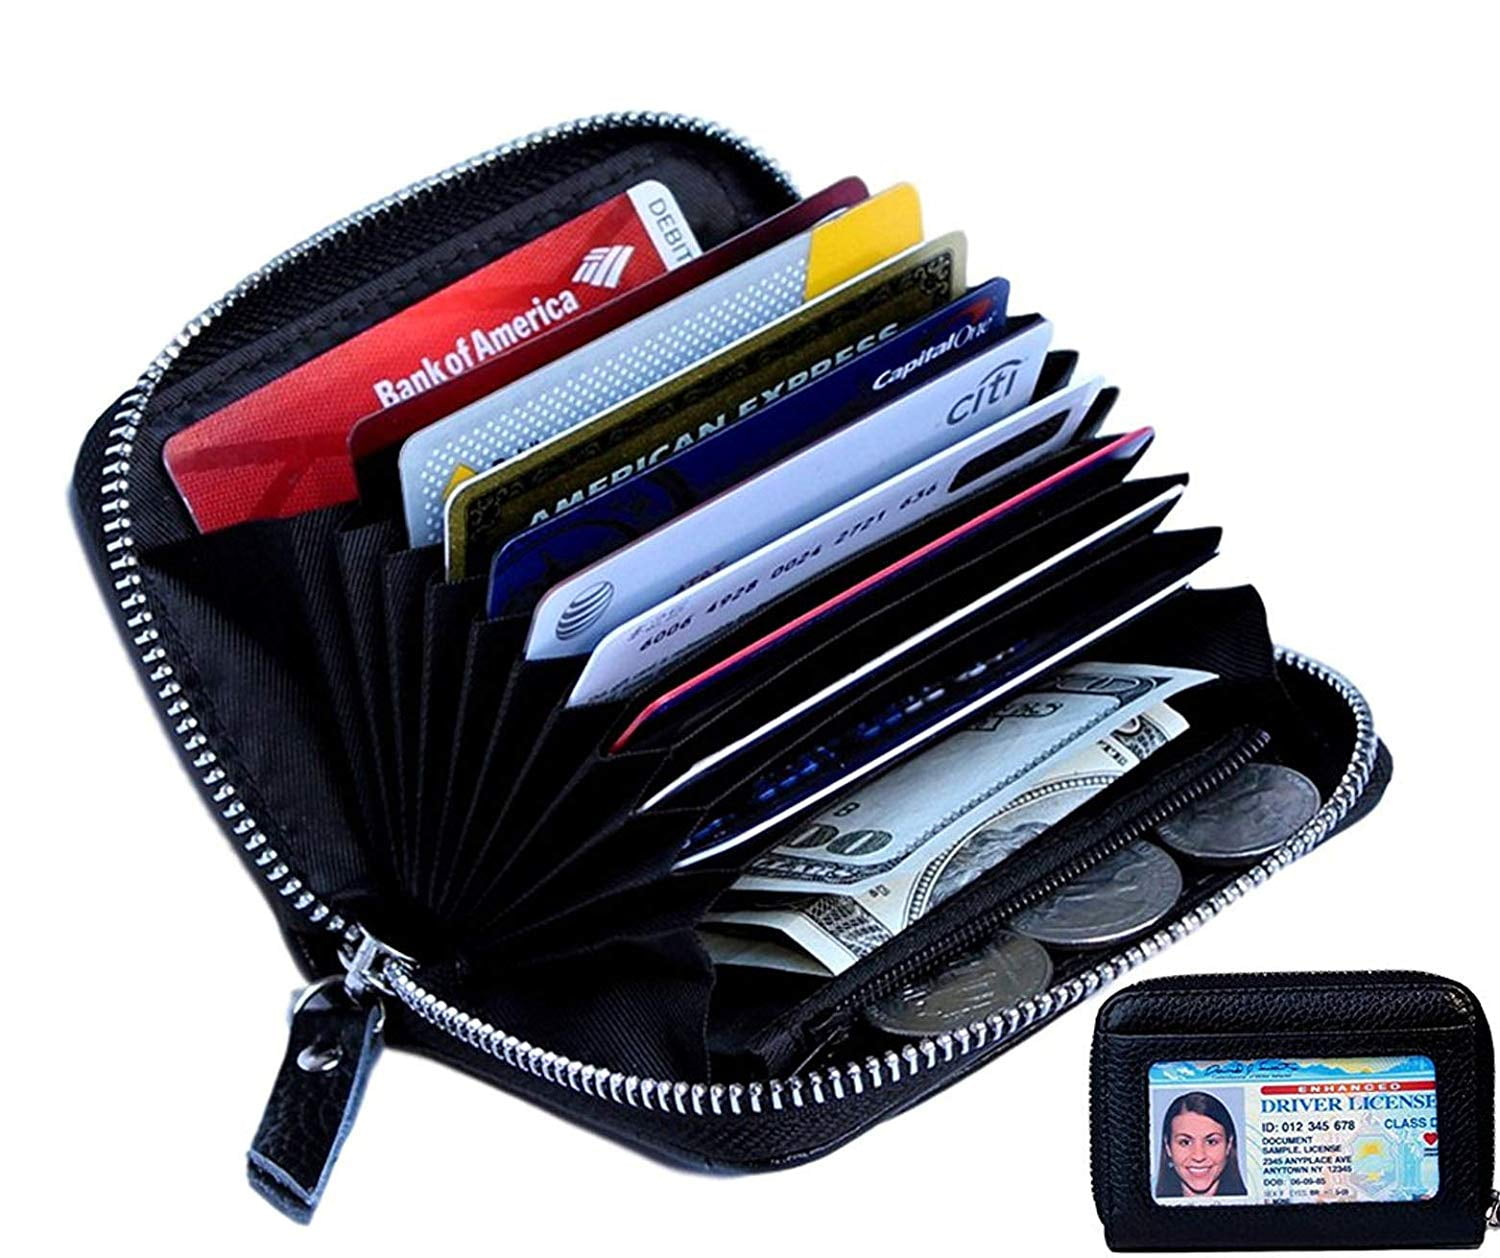 Credit Card Holder Card Protector Waterproof PU Leather Women Cash Coin Purse